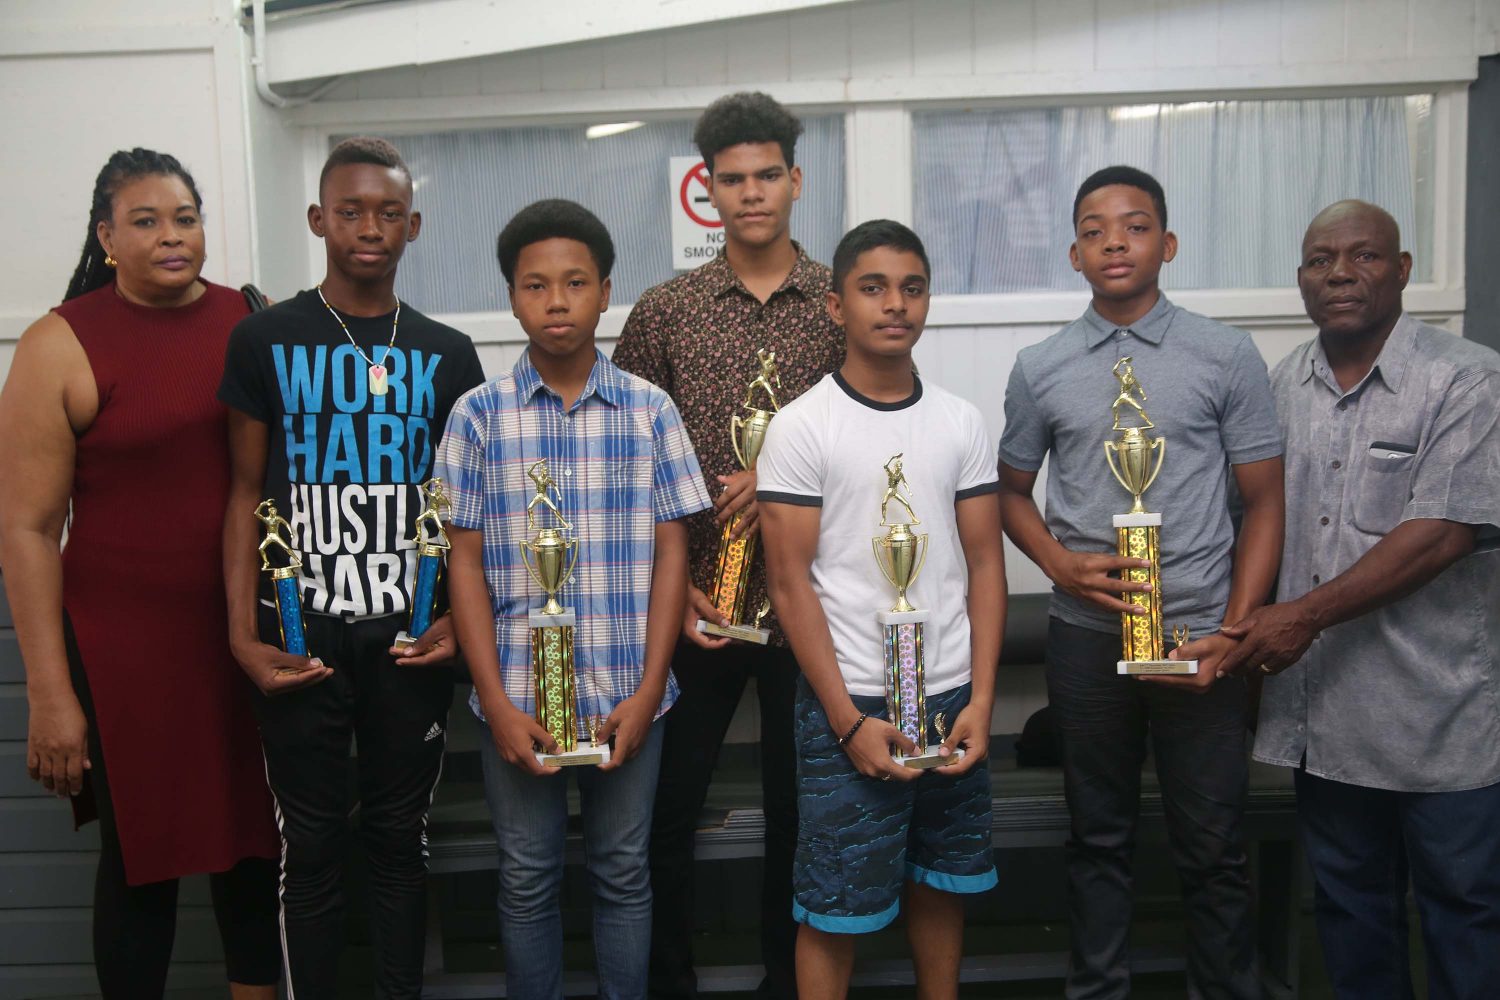  From left, Dawn Layne, Jamaal Nicholas, Terrence Rausch, Vincente Henery, Niron Bissu, Isaiah Layne and Mikey Layne with some of the trophies won. (Keno George photo)